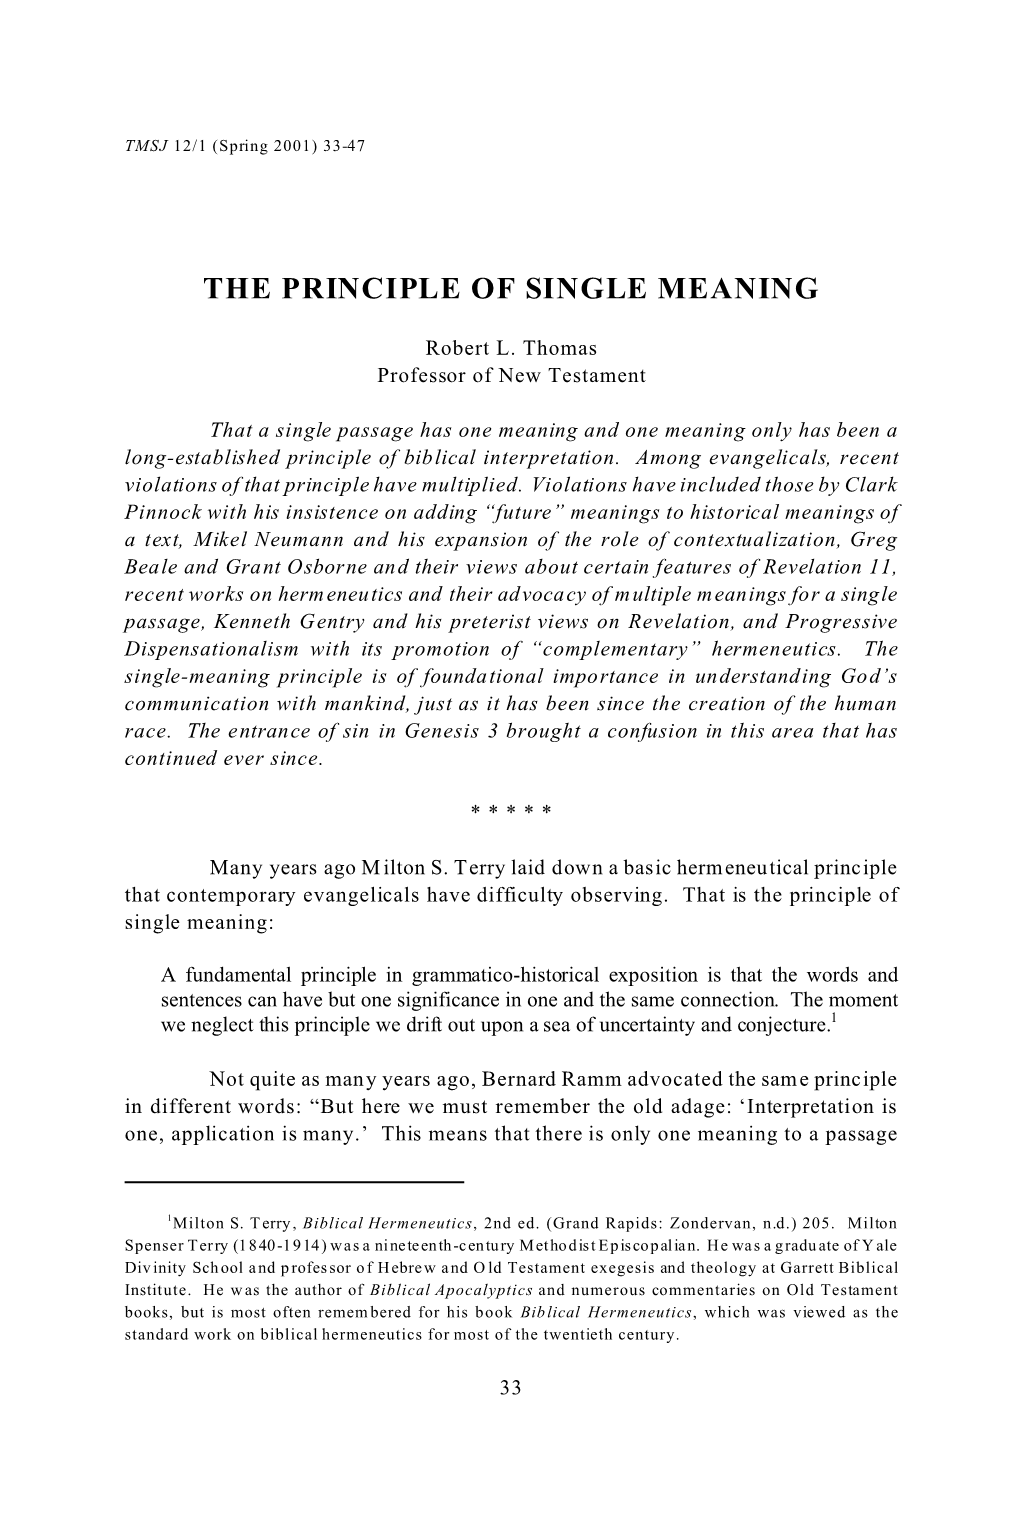 The Principle of Single Meaning